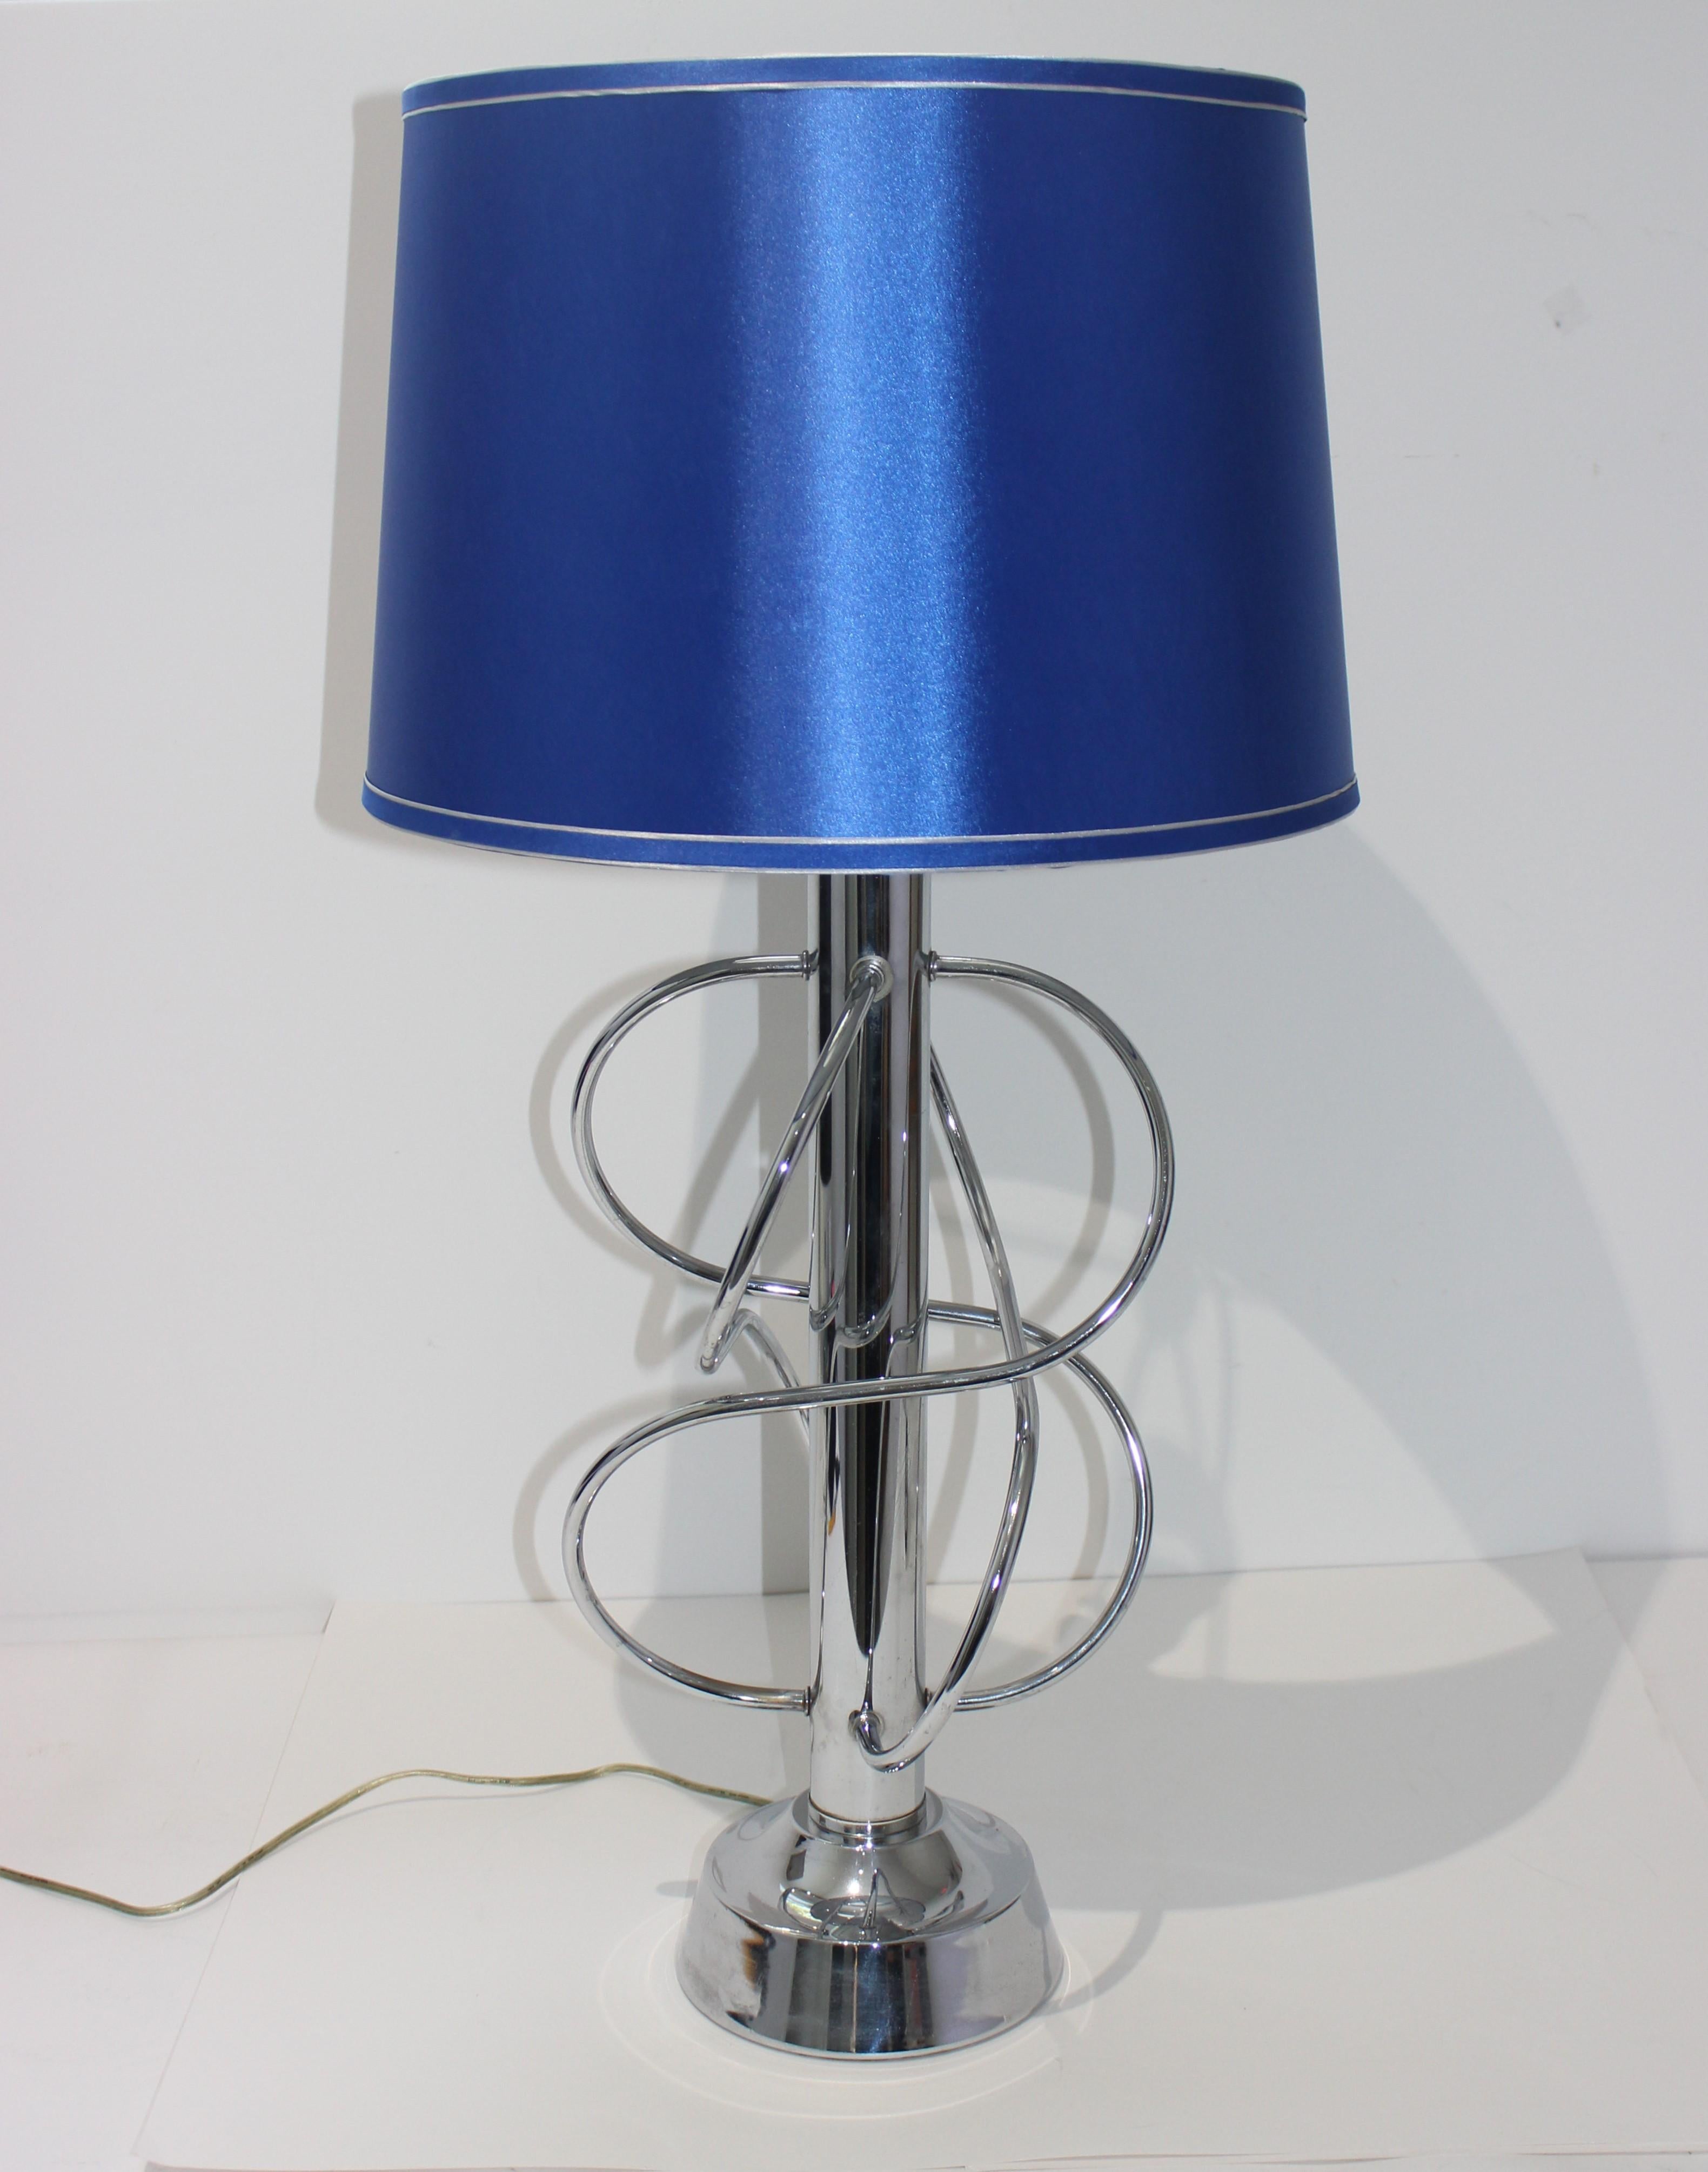 This stylish Scolari inspired polished chrome table lamp dates to the 1970s.

Note: Height to top of socket 25